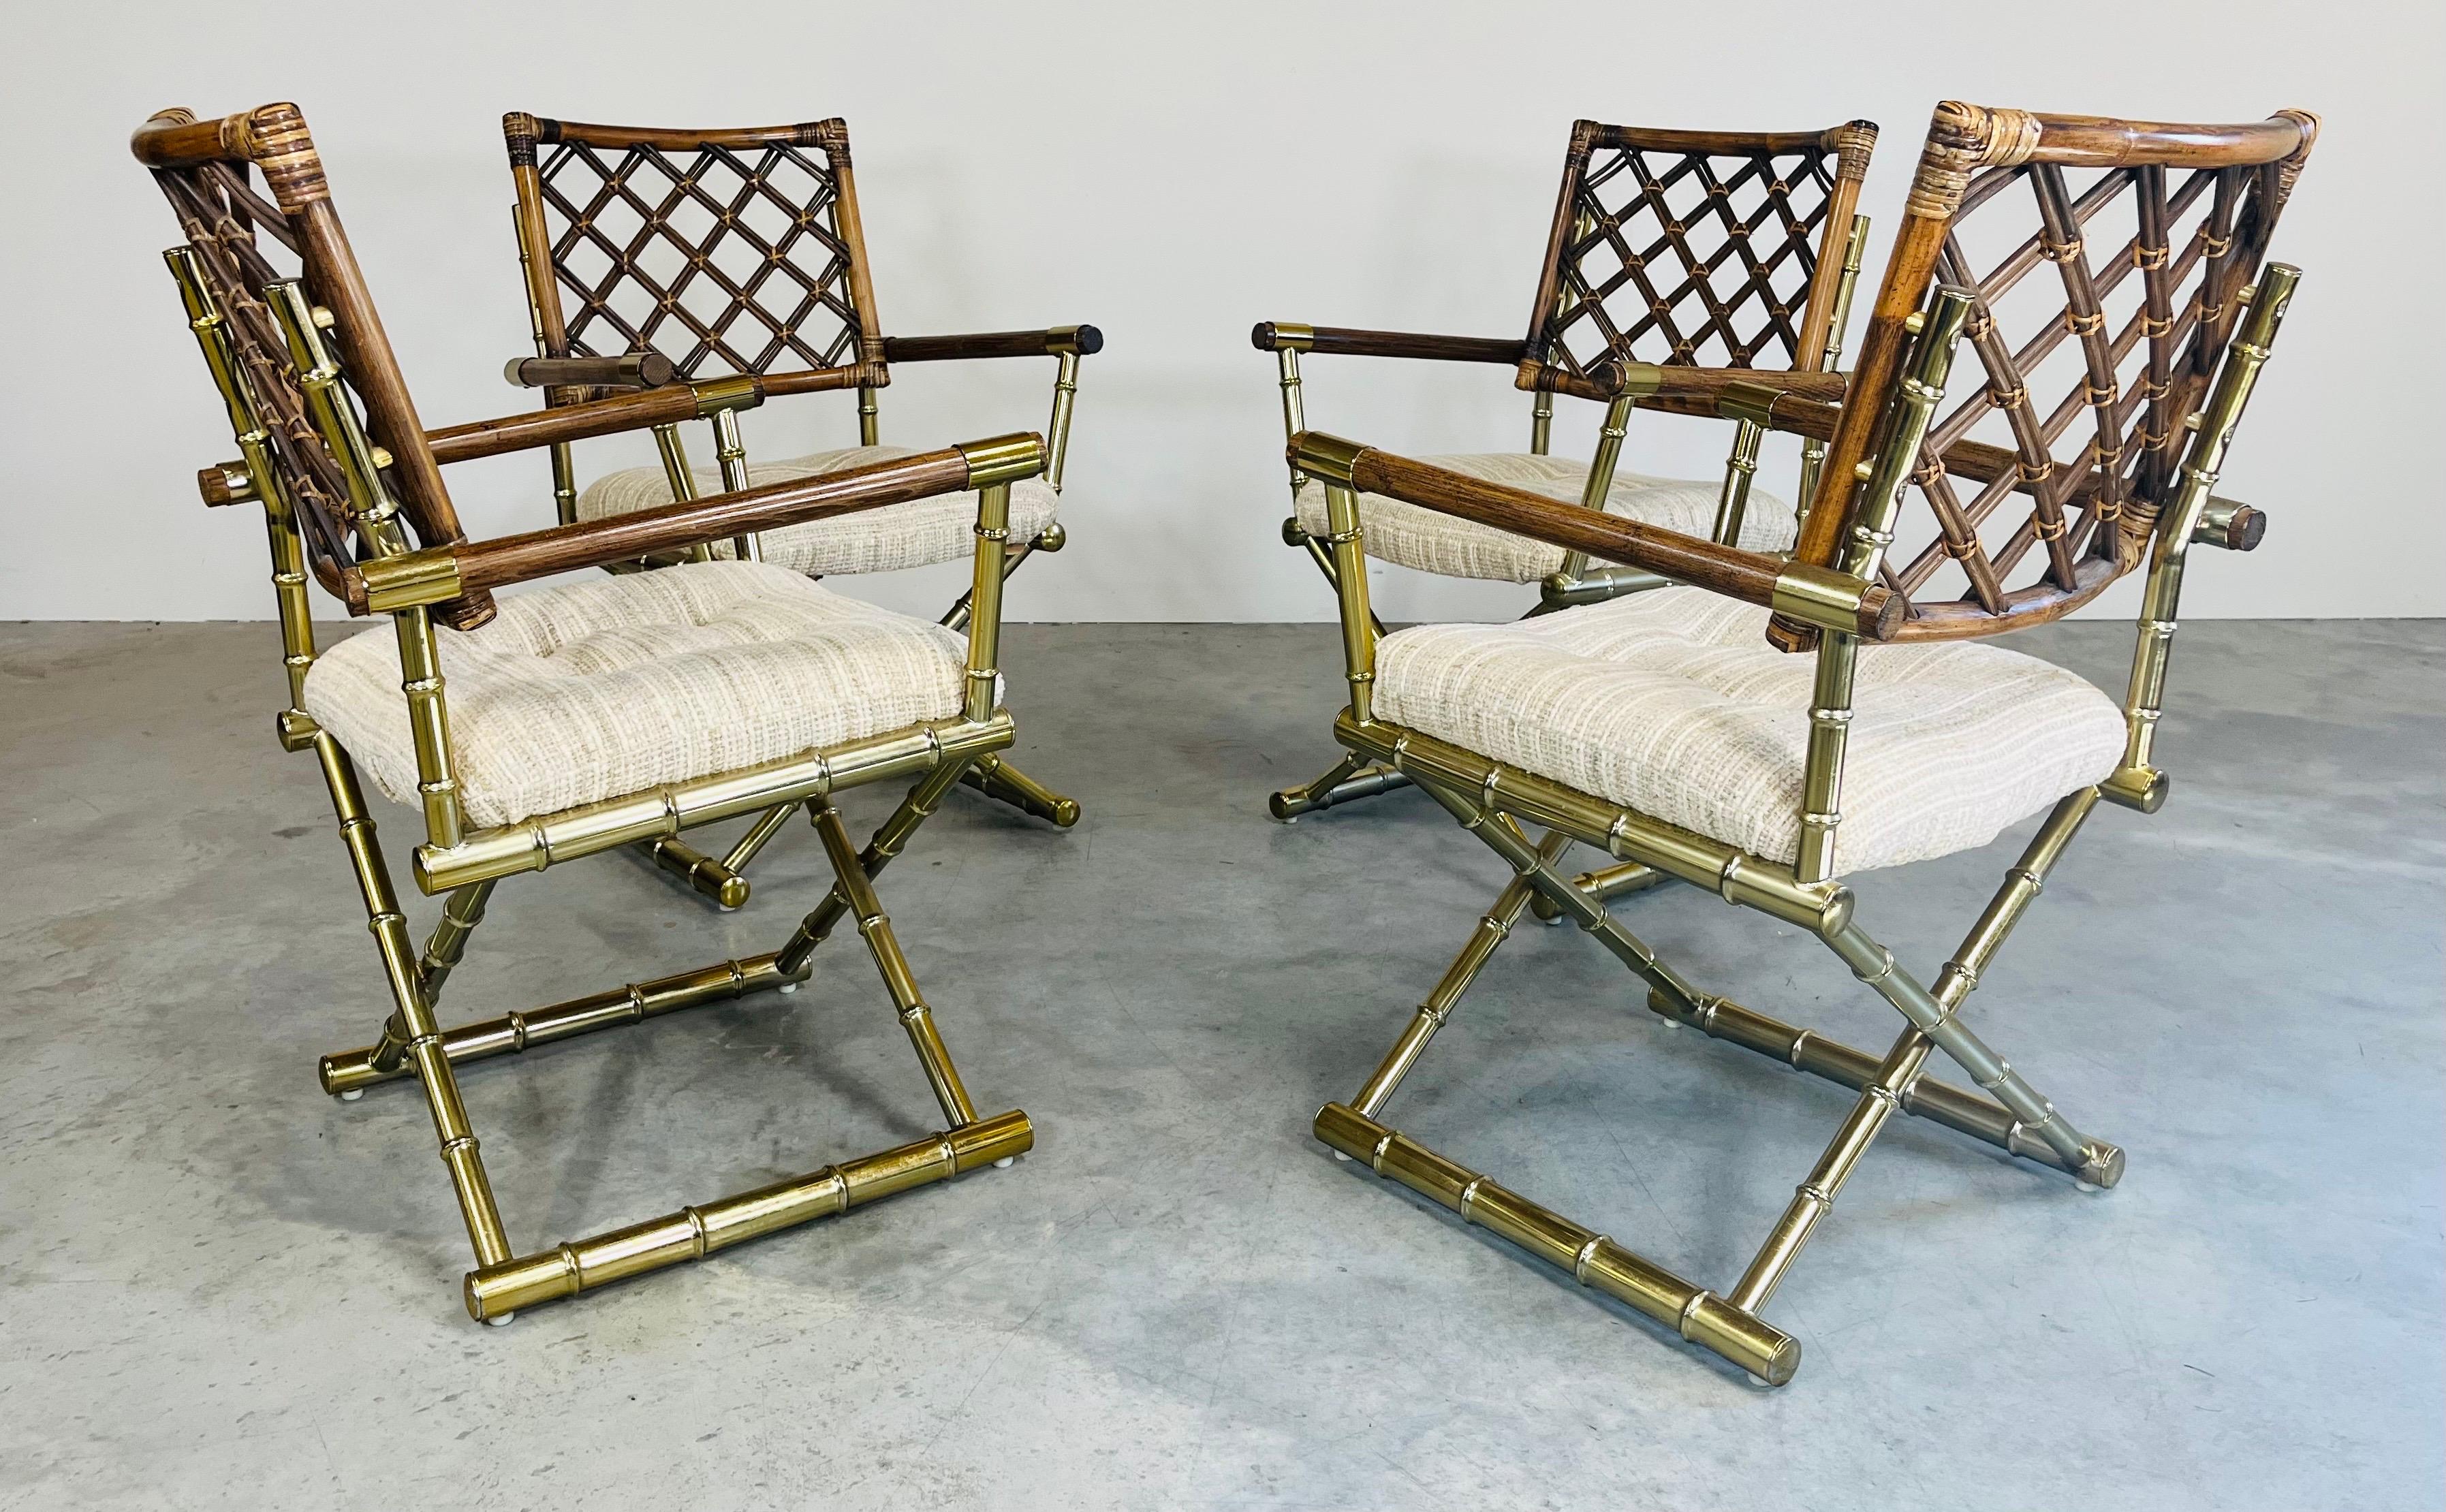 A set of 4 Hollywood Regency armchairs having faux bamboo brass X-form bases with cane wrapped bamboo lattice backrests and neutral tweed soft cushion seats by Daystrom circa 1985. Very attractive and comfortable. In great condition with solid